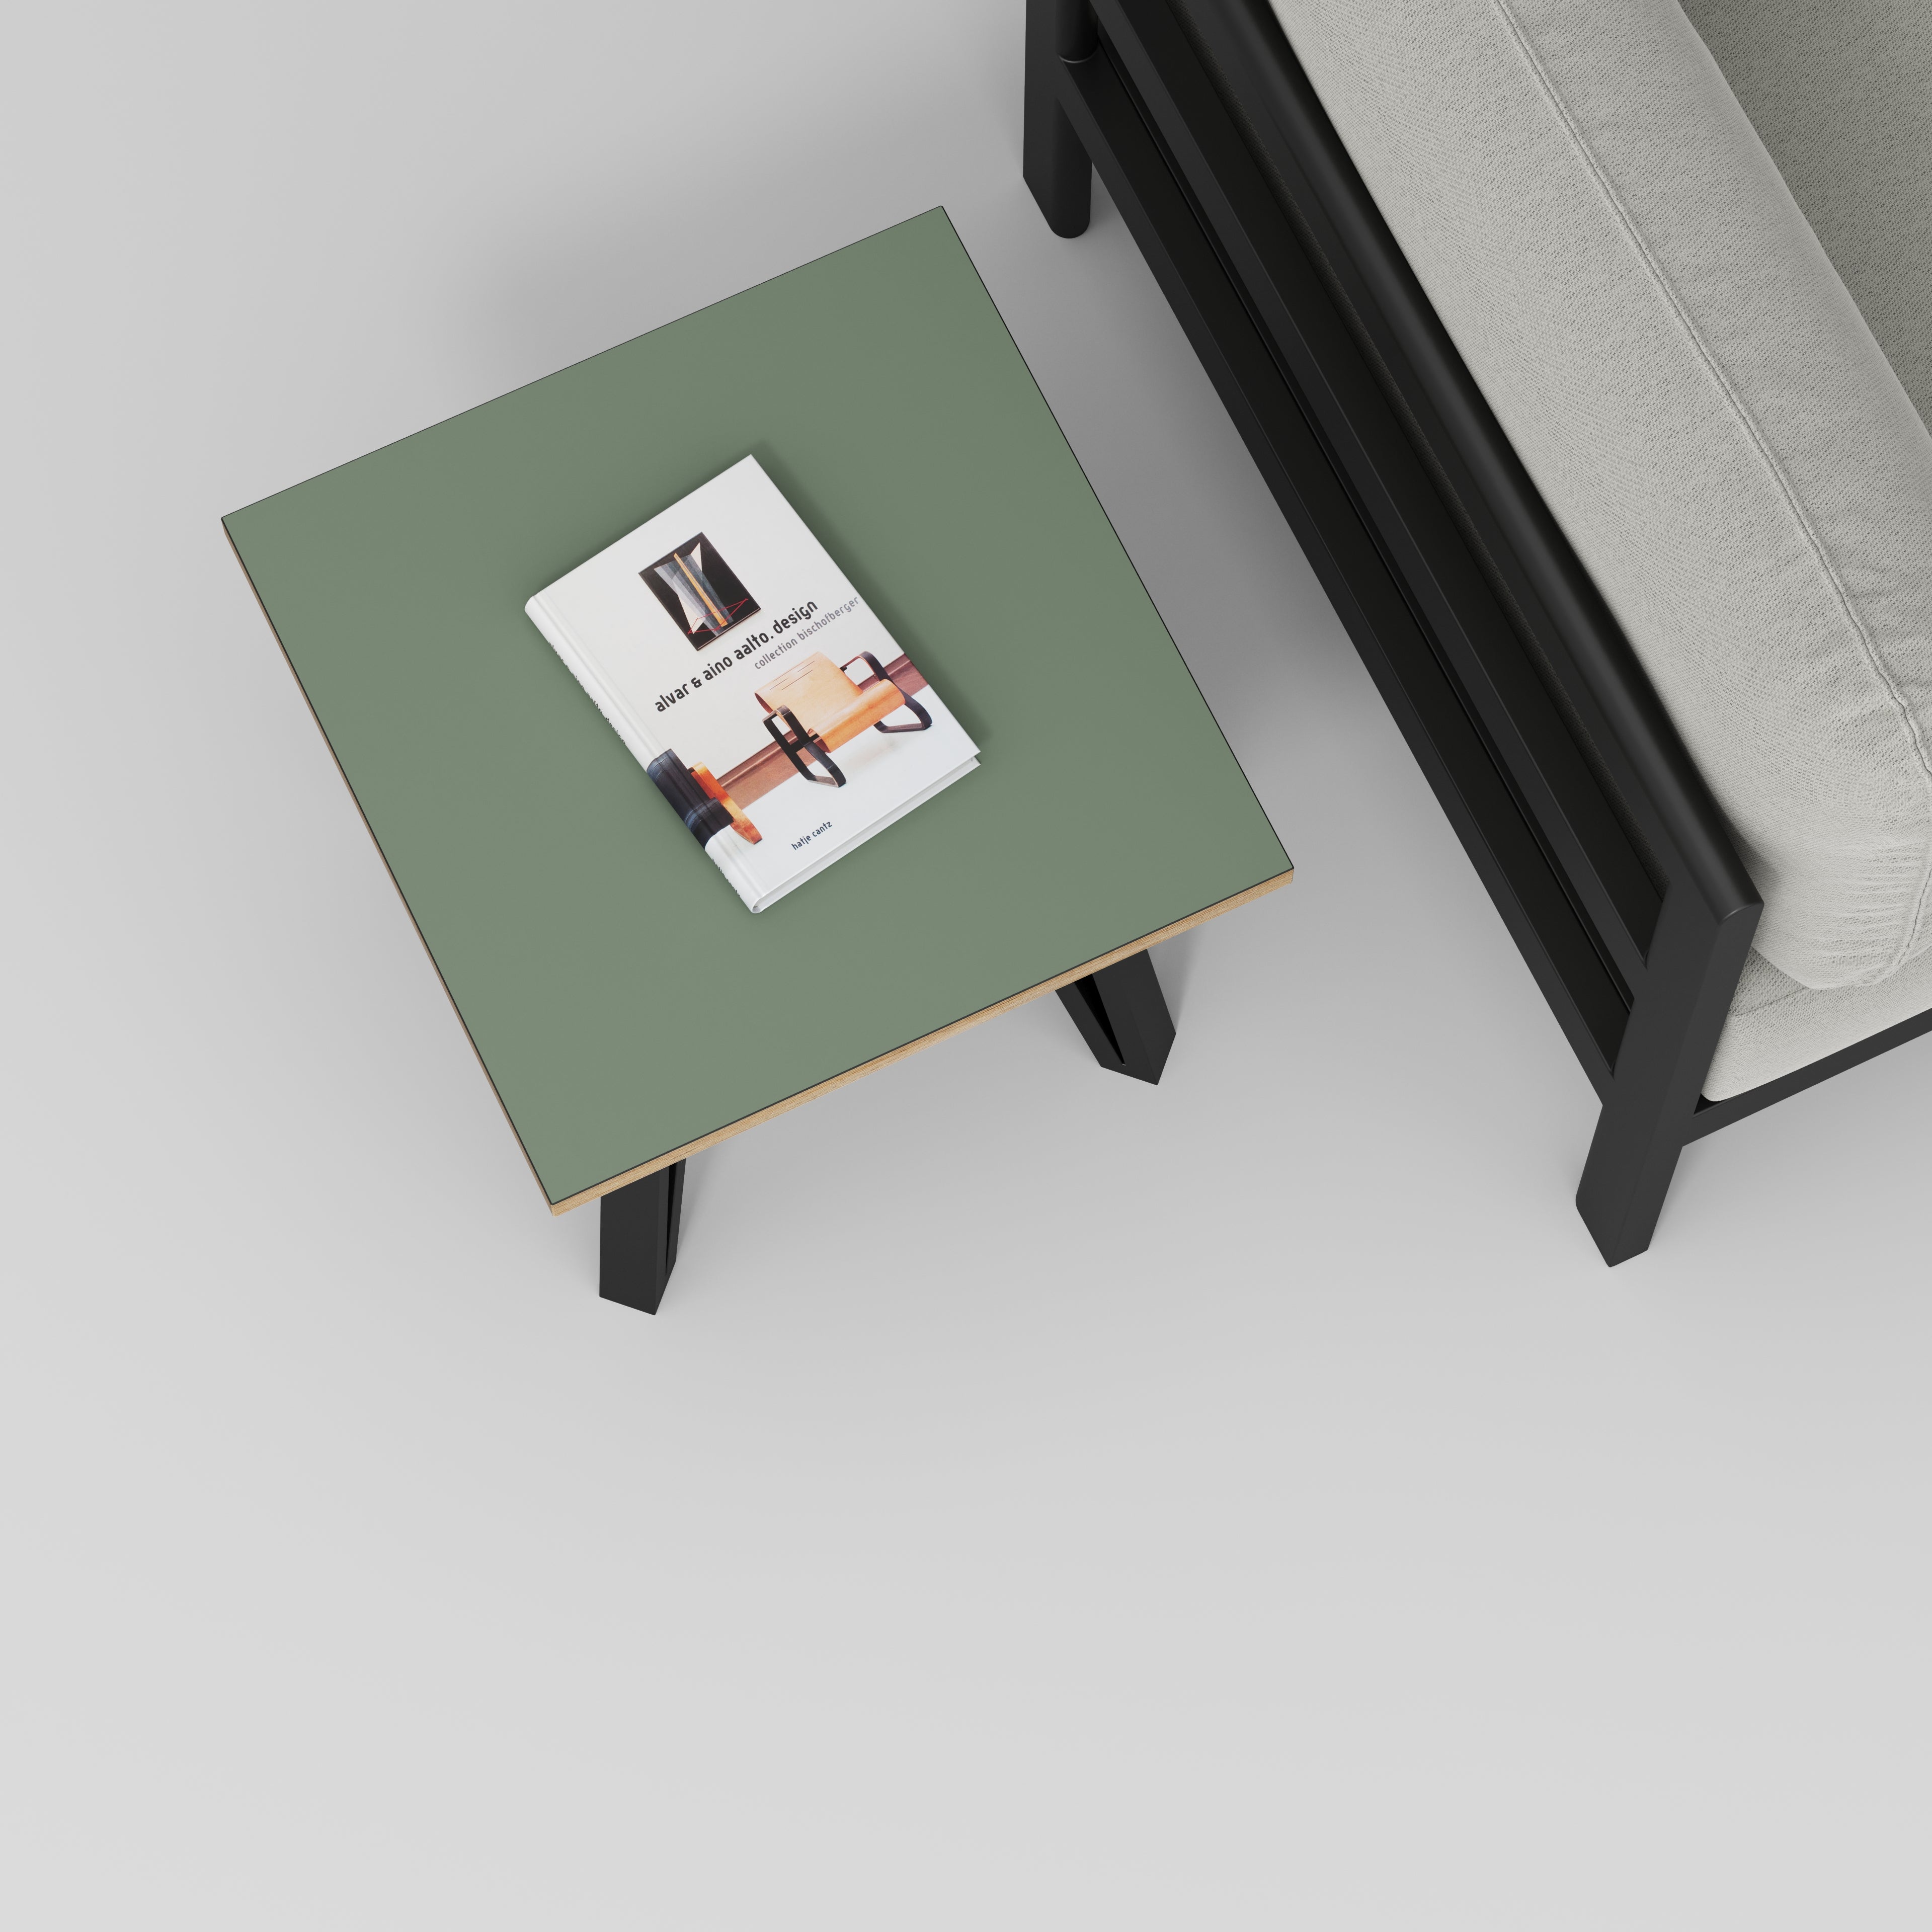 Side Table with Black Box Hairpin Legs - Formica Green Slate - 500(w) x 500(d) x 425(h)